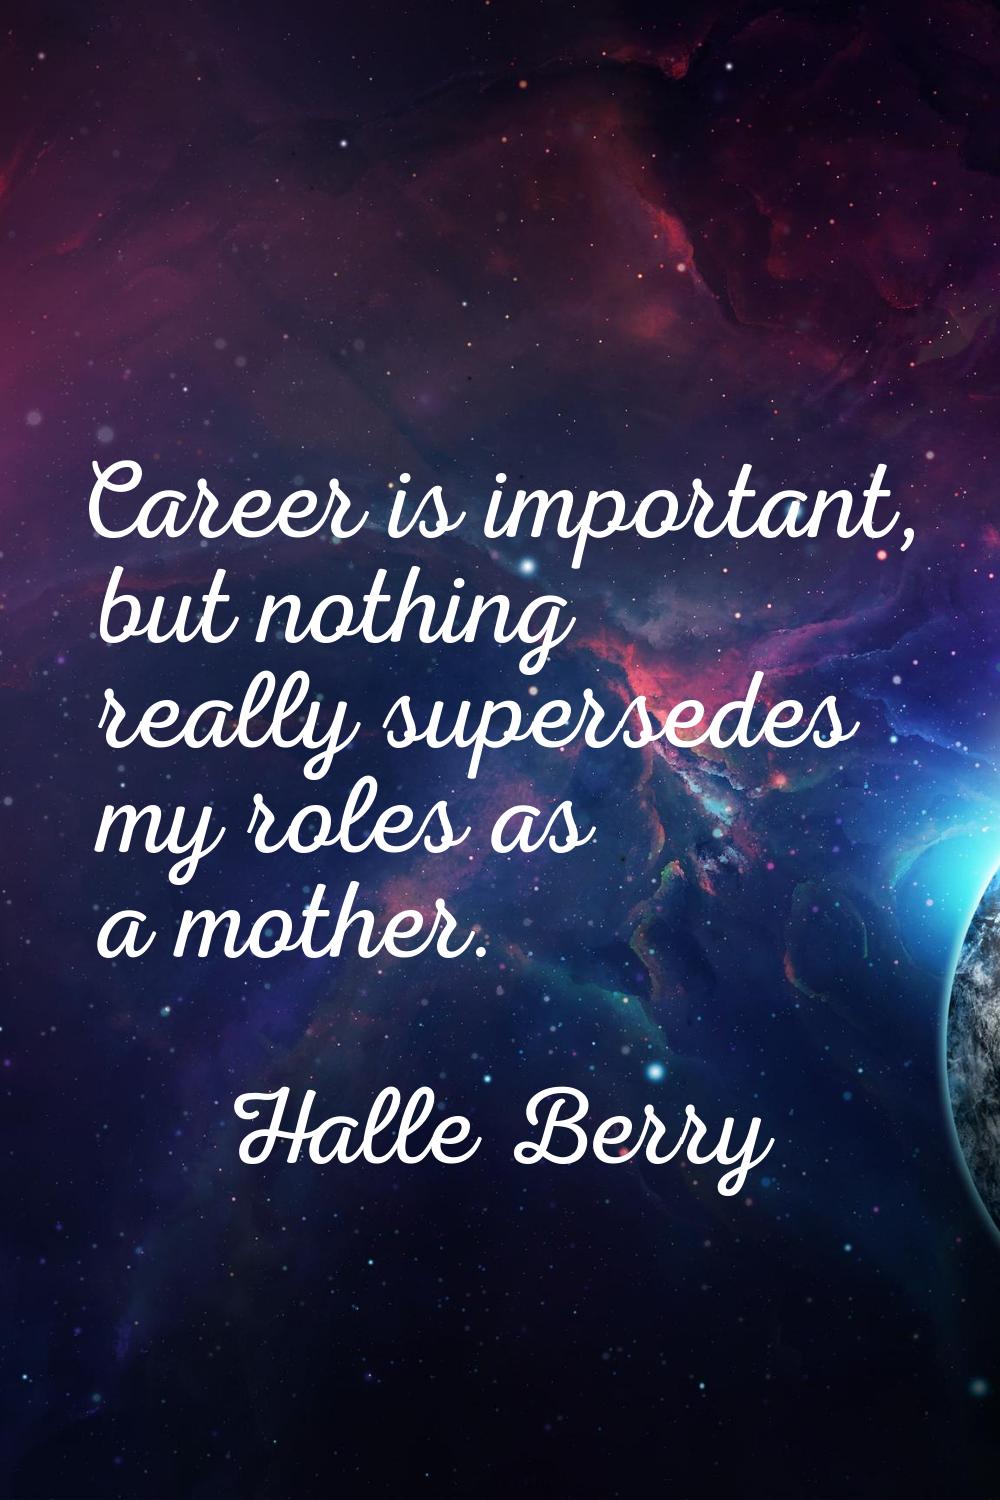 Career is important, but nothing really supersedes my roles as a mother.